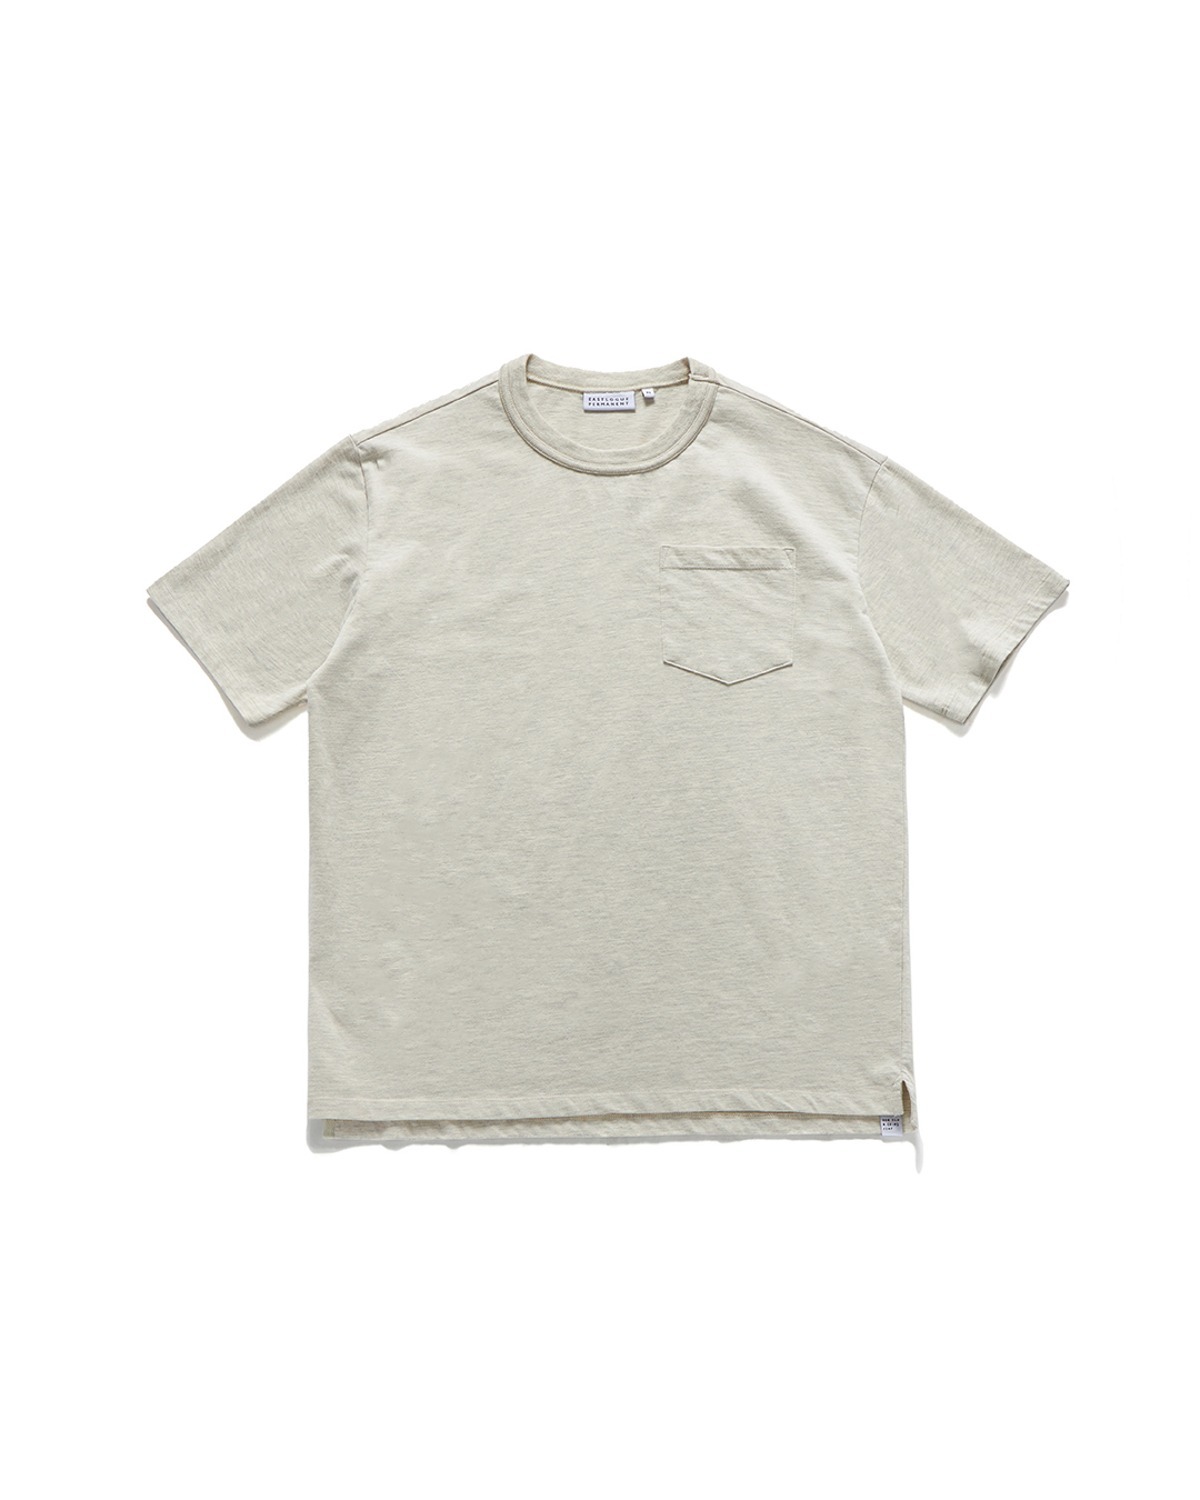 ONE POCKET T-SHIRT (new ver.) / OATMEAL